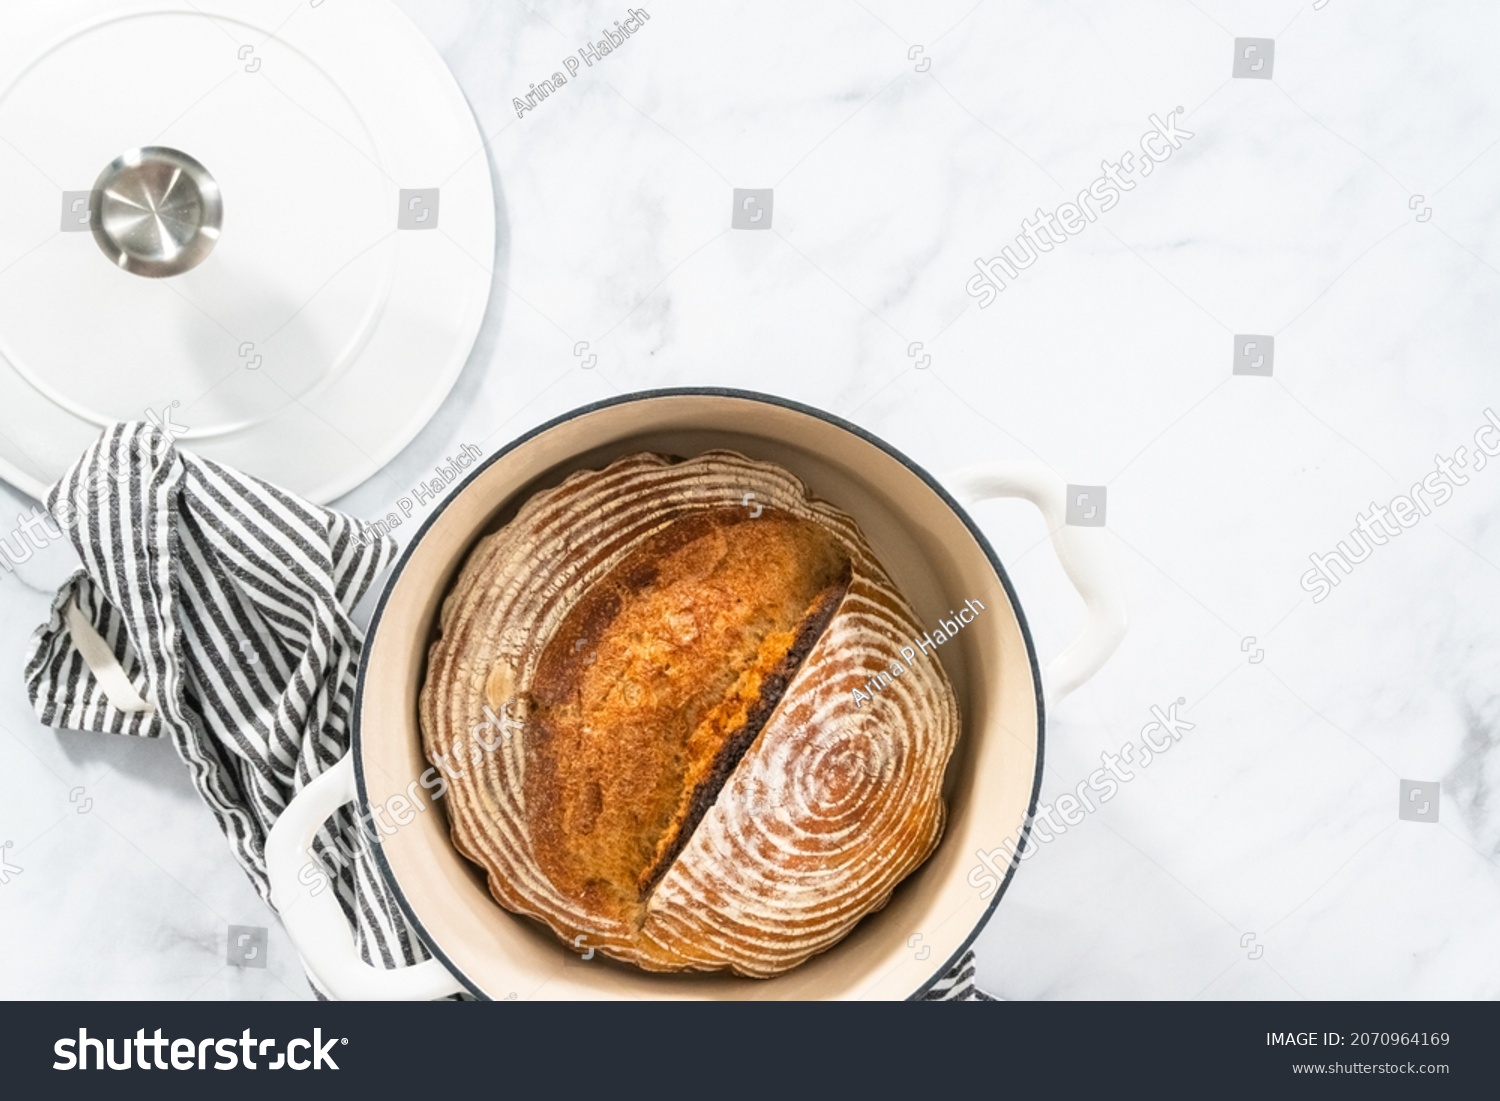 Flat lay. Freshly baked loaf of a wheat sourdough bread with marks from bread proofing basket in enameled cast iron dutch oven. #2070964169